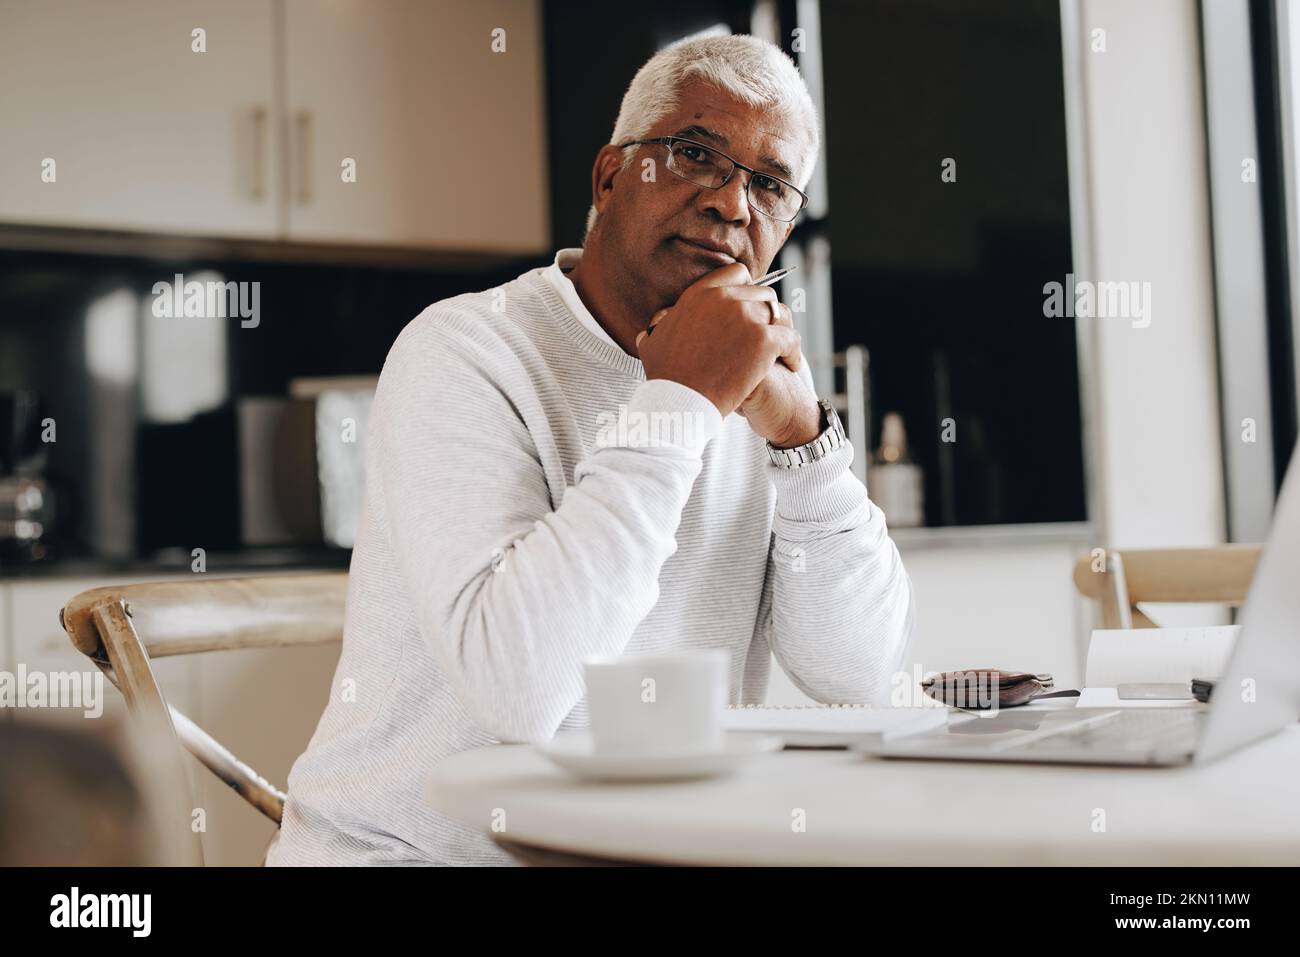 Mature business professional looking at the camera while sitting at a desk in his home. Senior businessman using a laptop while working from home. Stock Photo